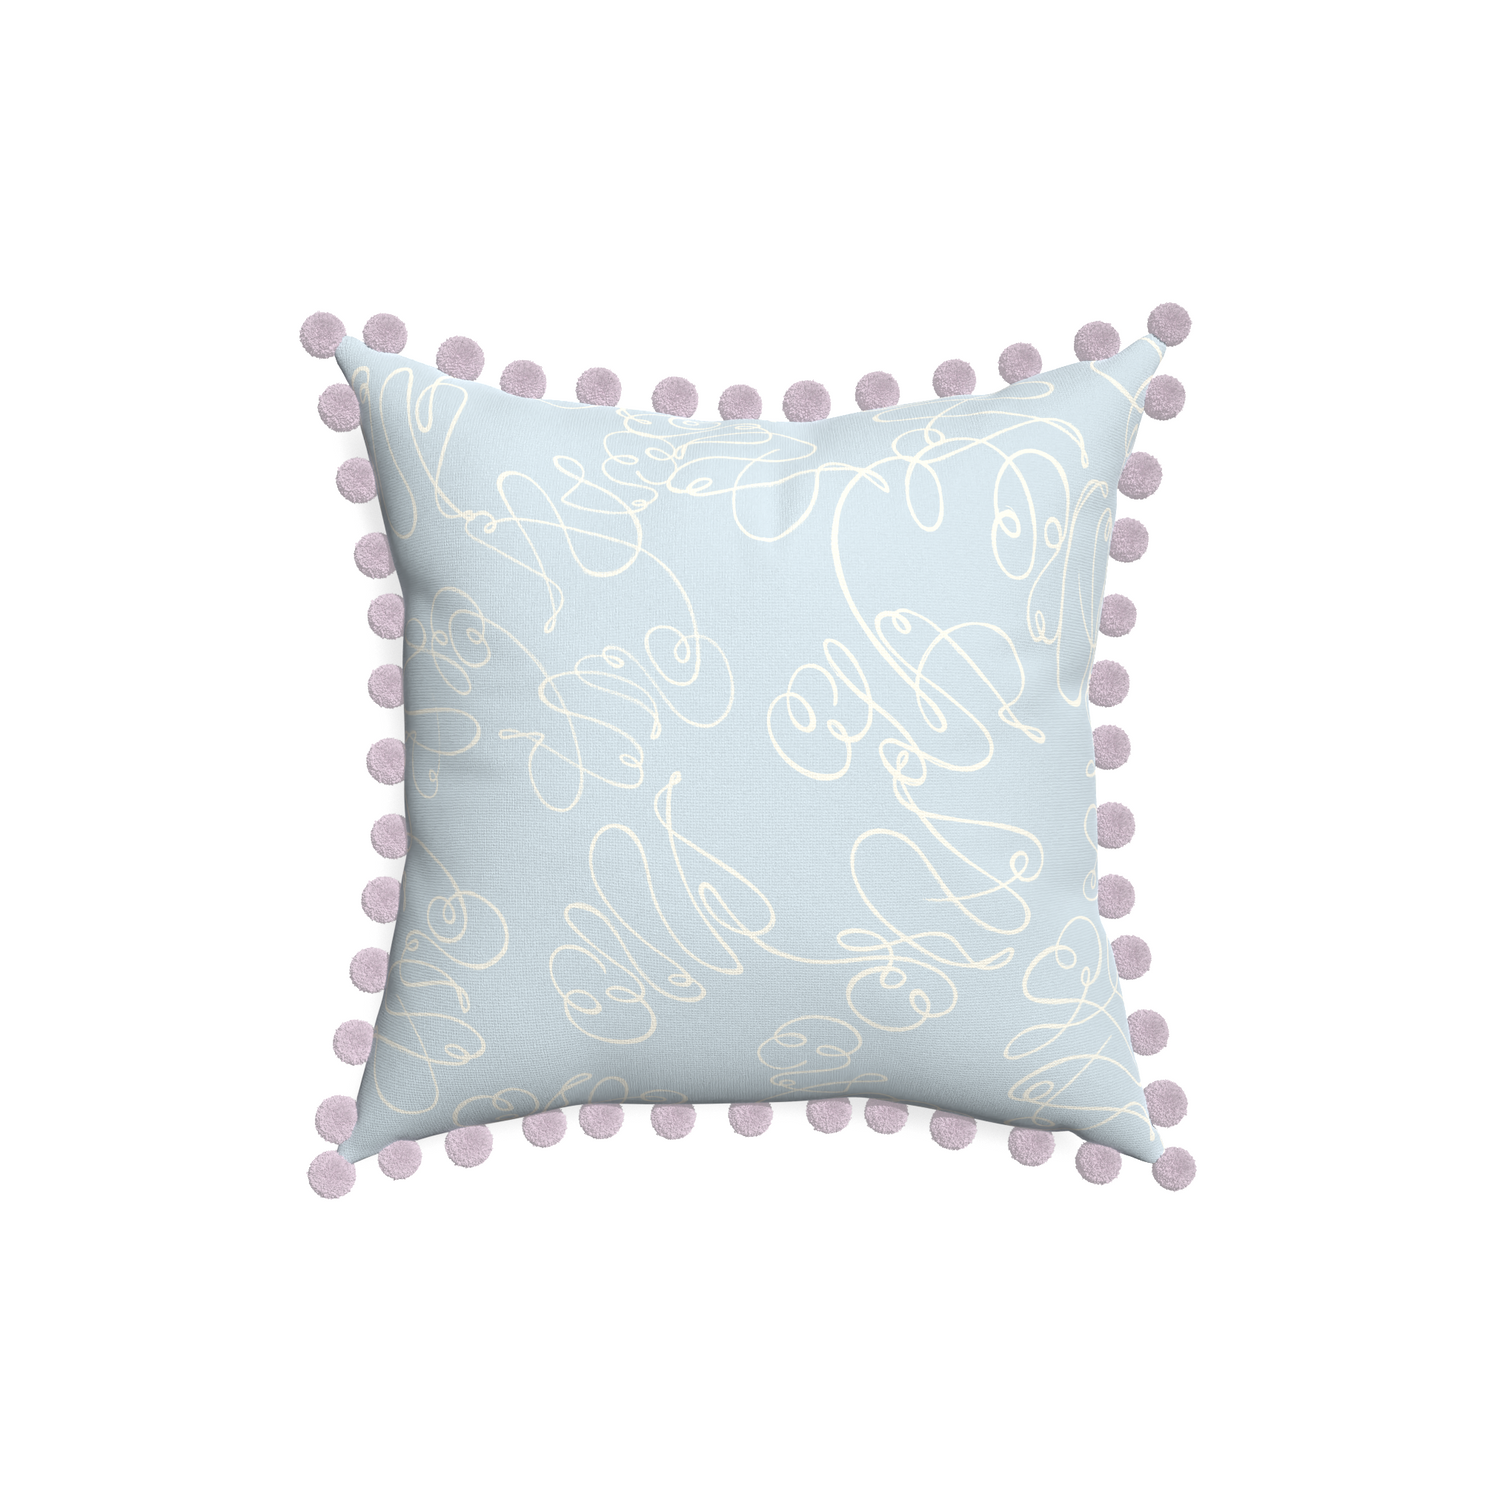 18-square mirabella custom pillow with l on white background